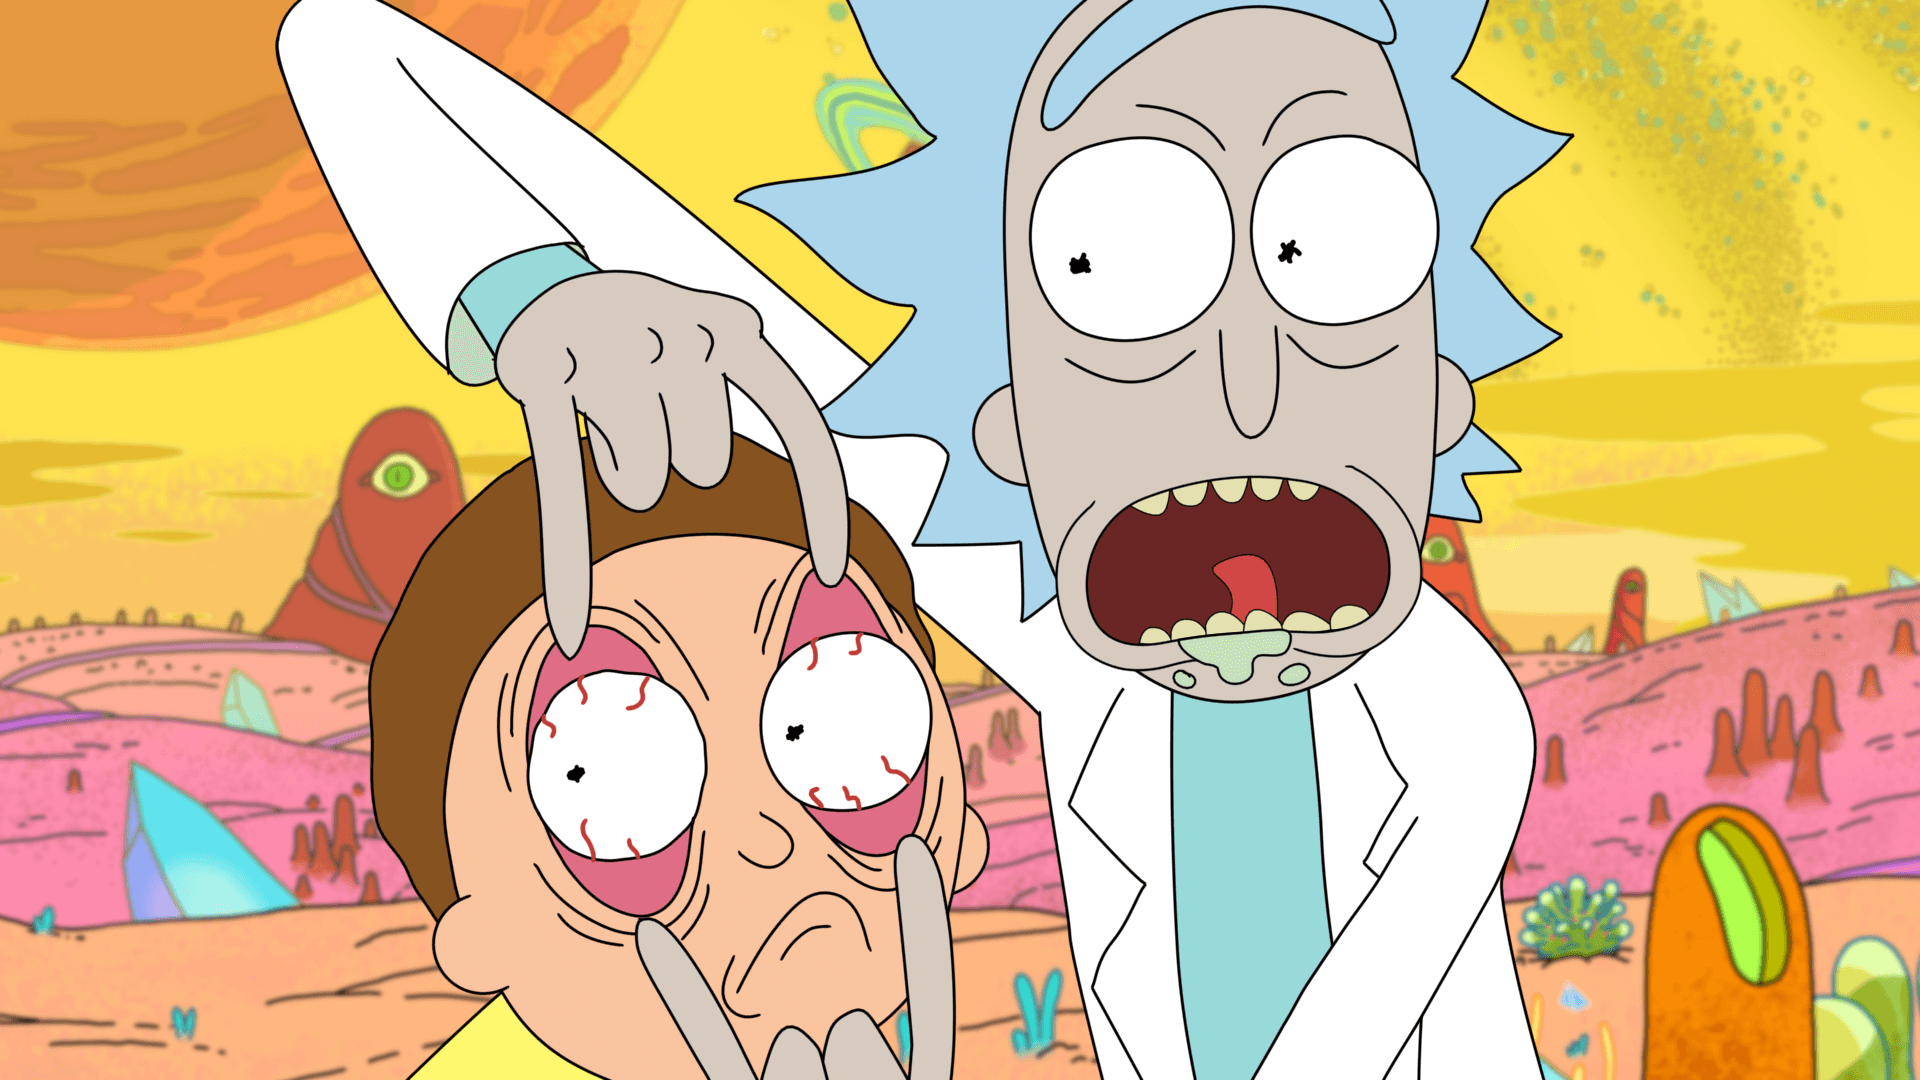 Rick and Morty Wallpaper HD 63912 1920x1080px